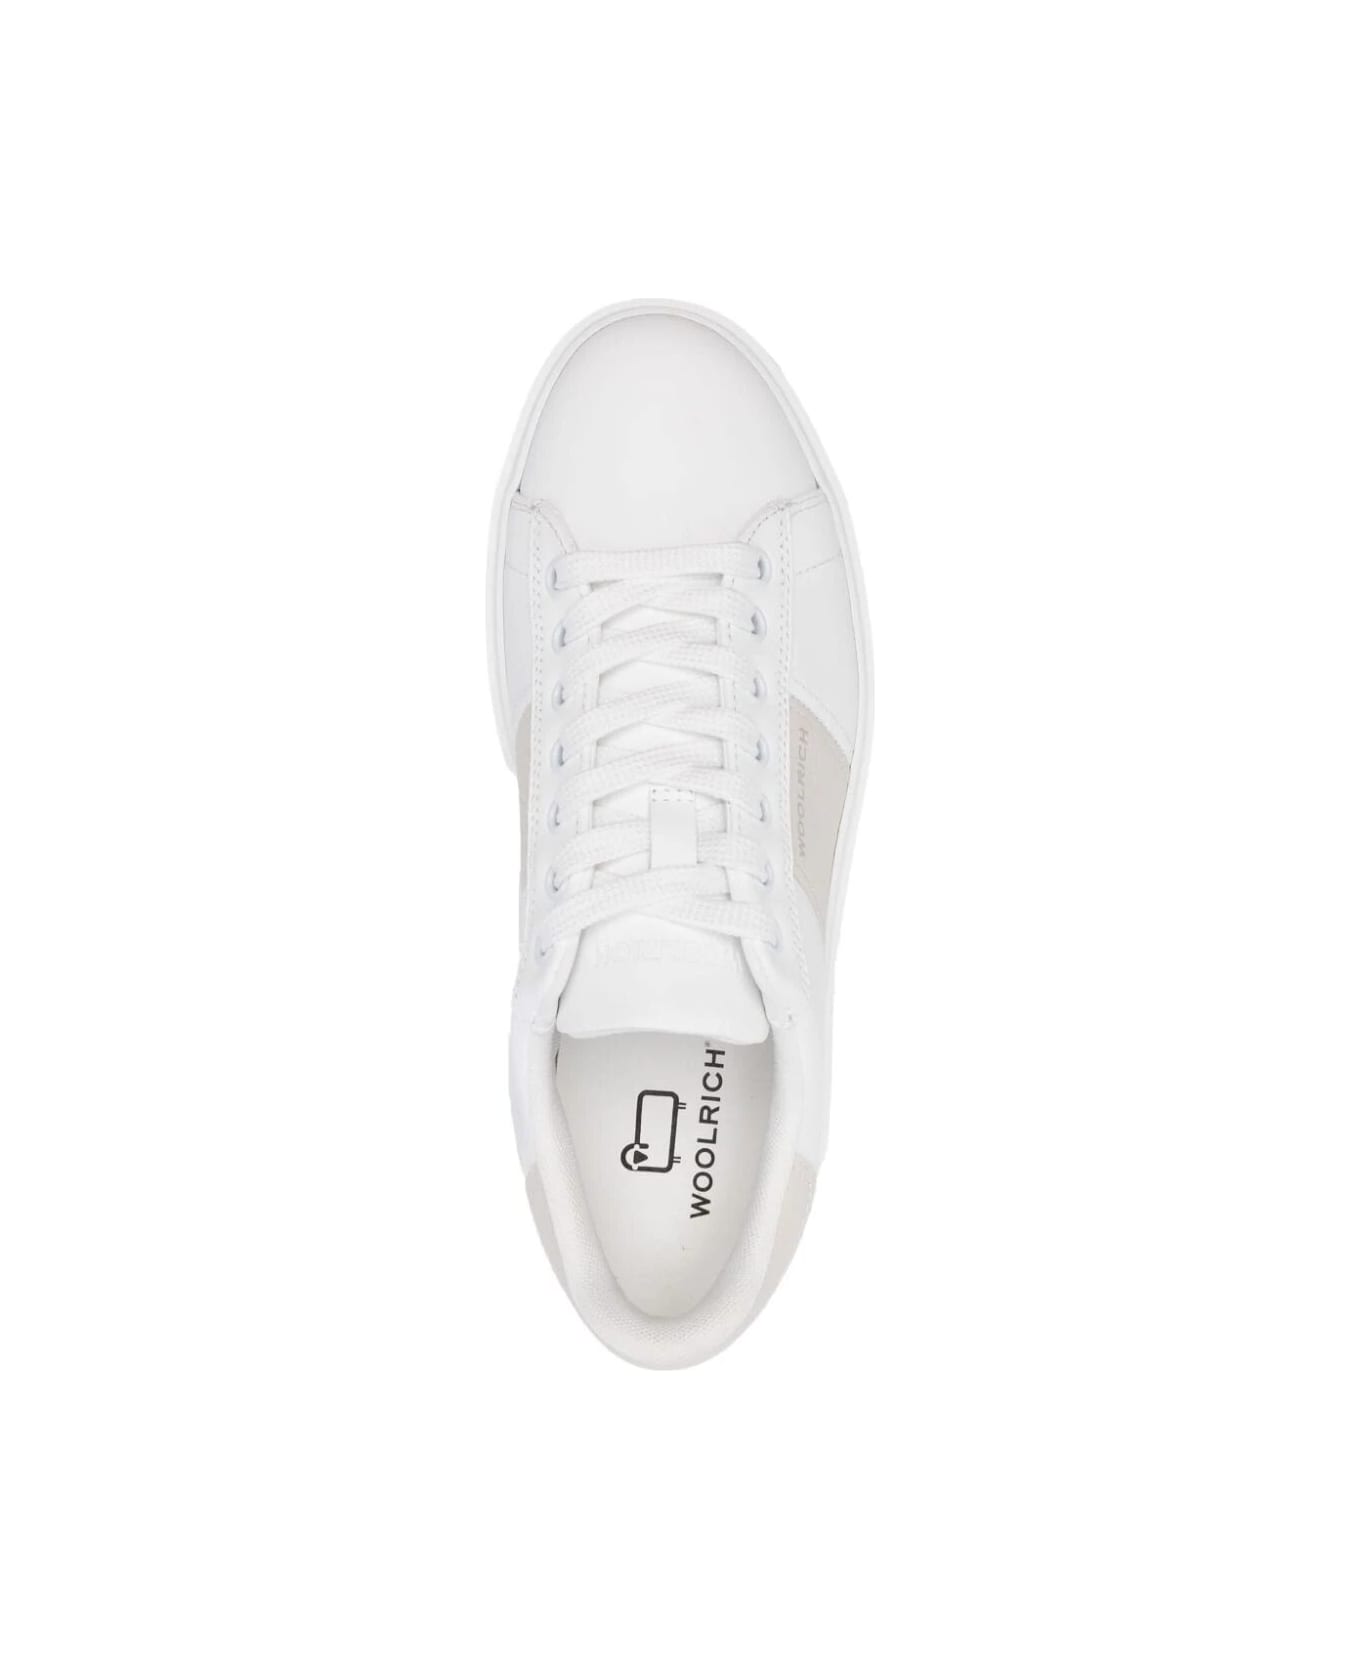 Woolrich Classic Court Sneakers - White Cream スニーカー